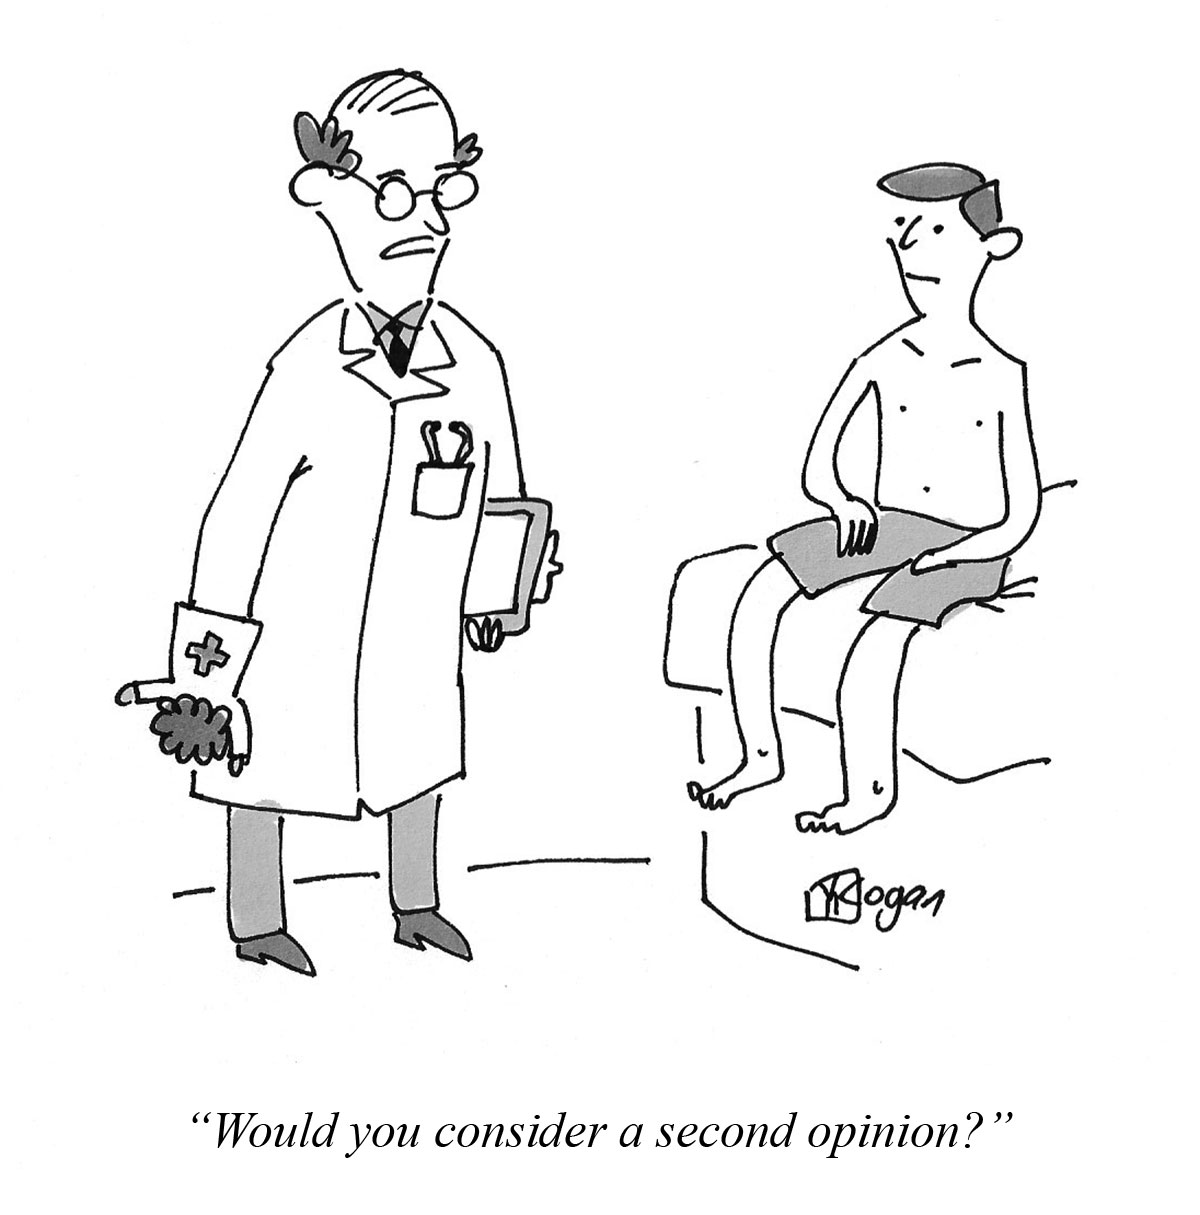 Cartoon about getting a second opinion.